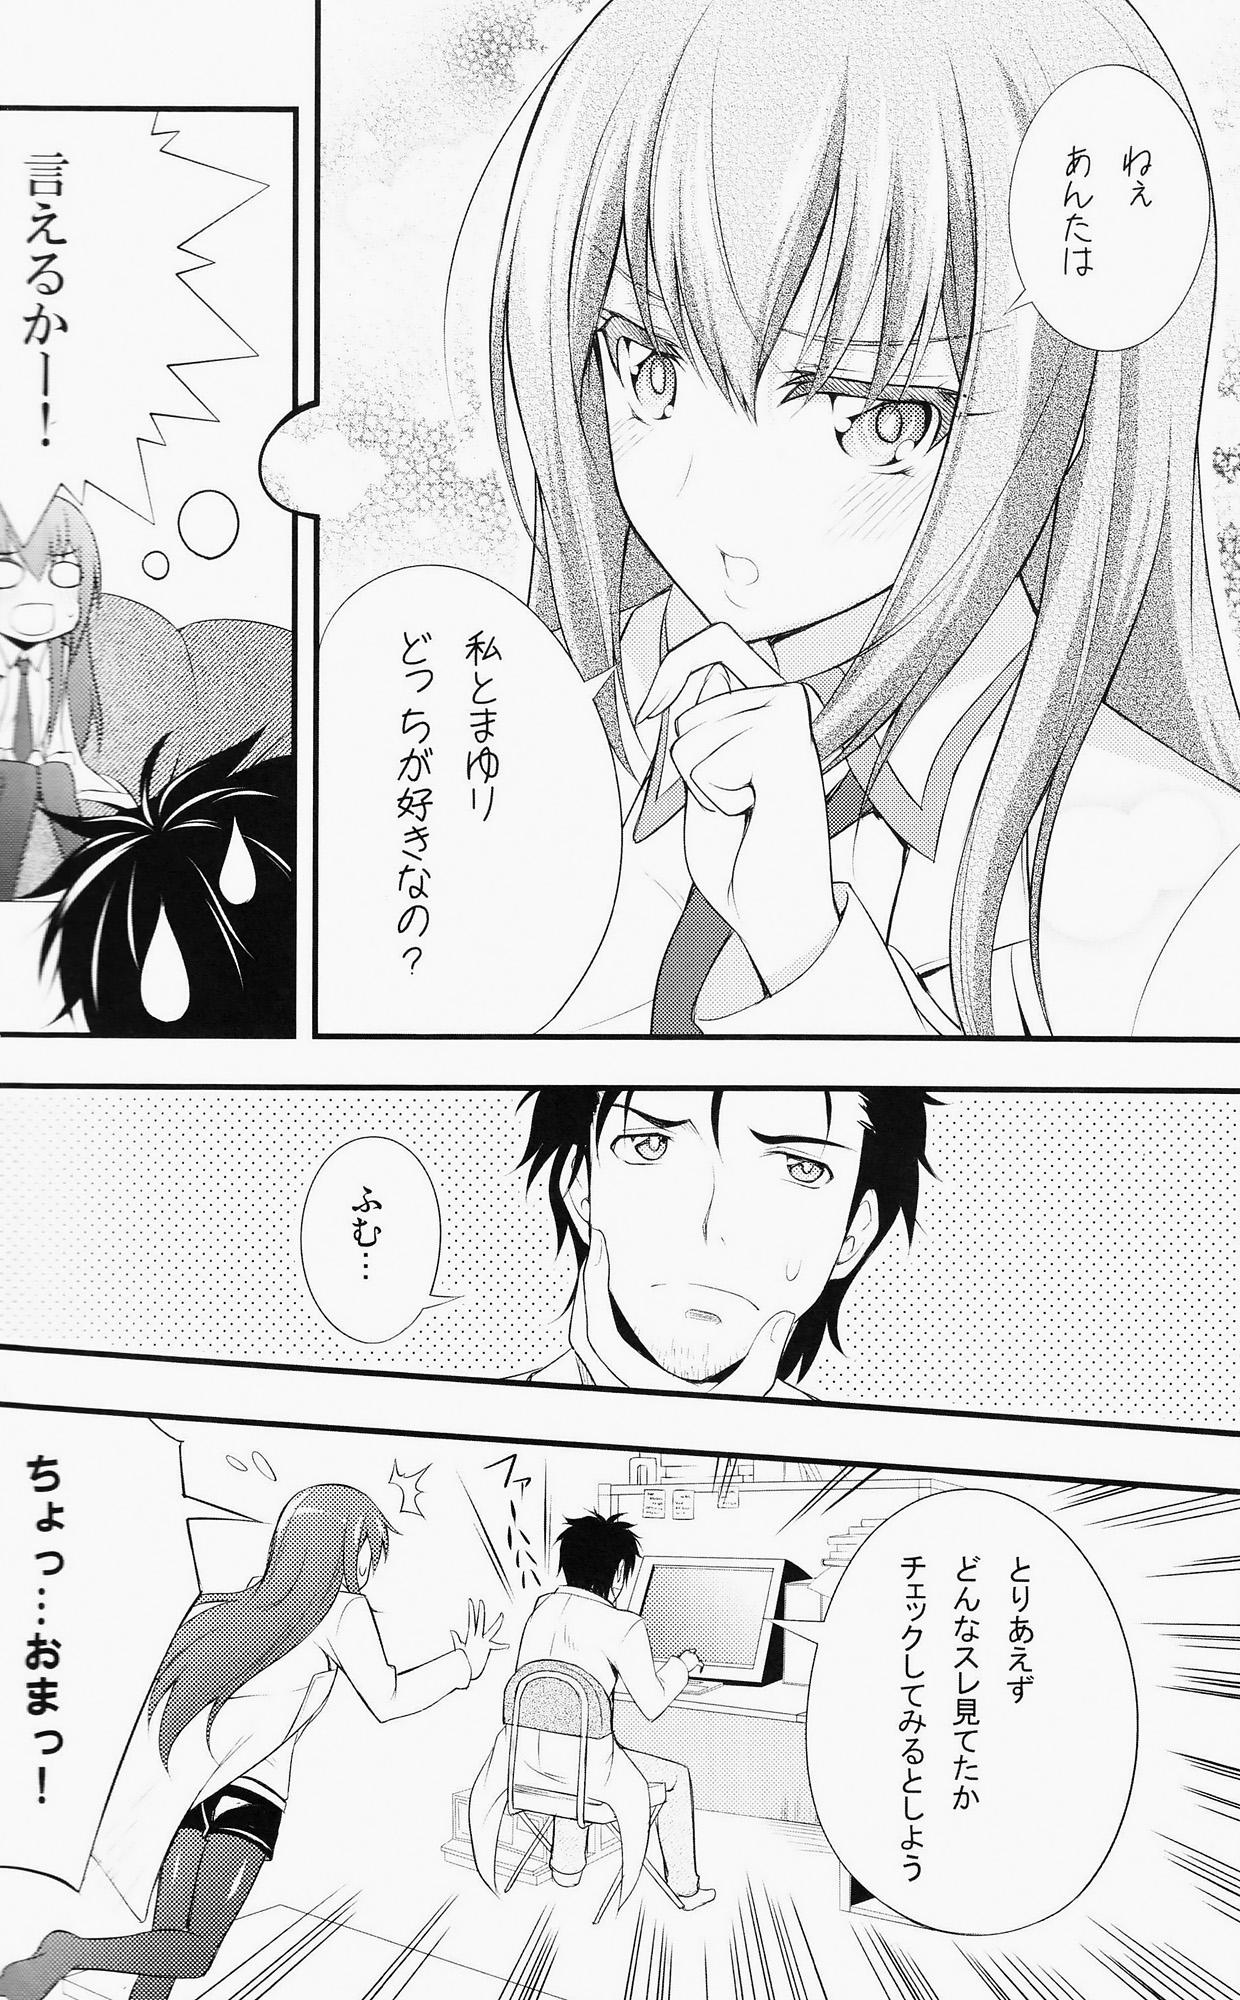 Calle Aishuu Zenmono no Ansible - Steinsgate Eating - Page 9